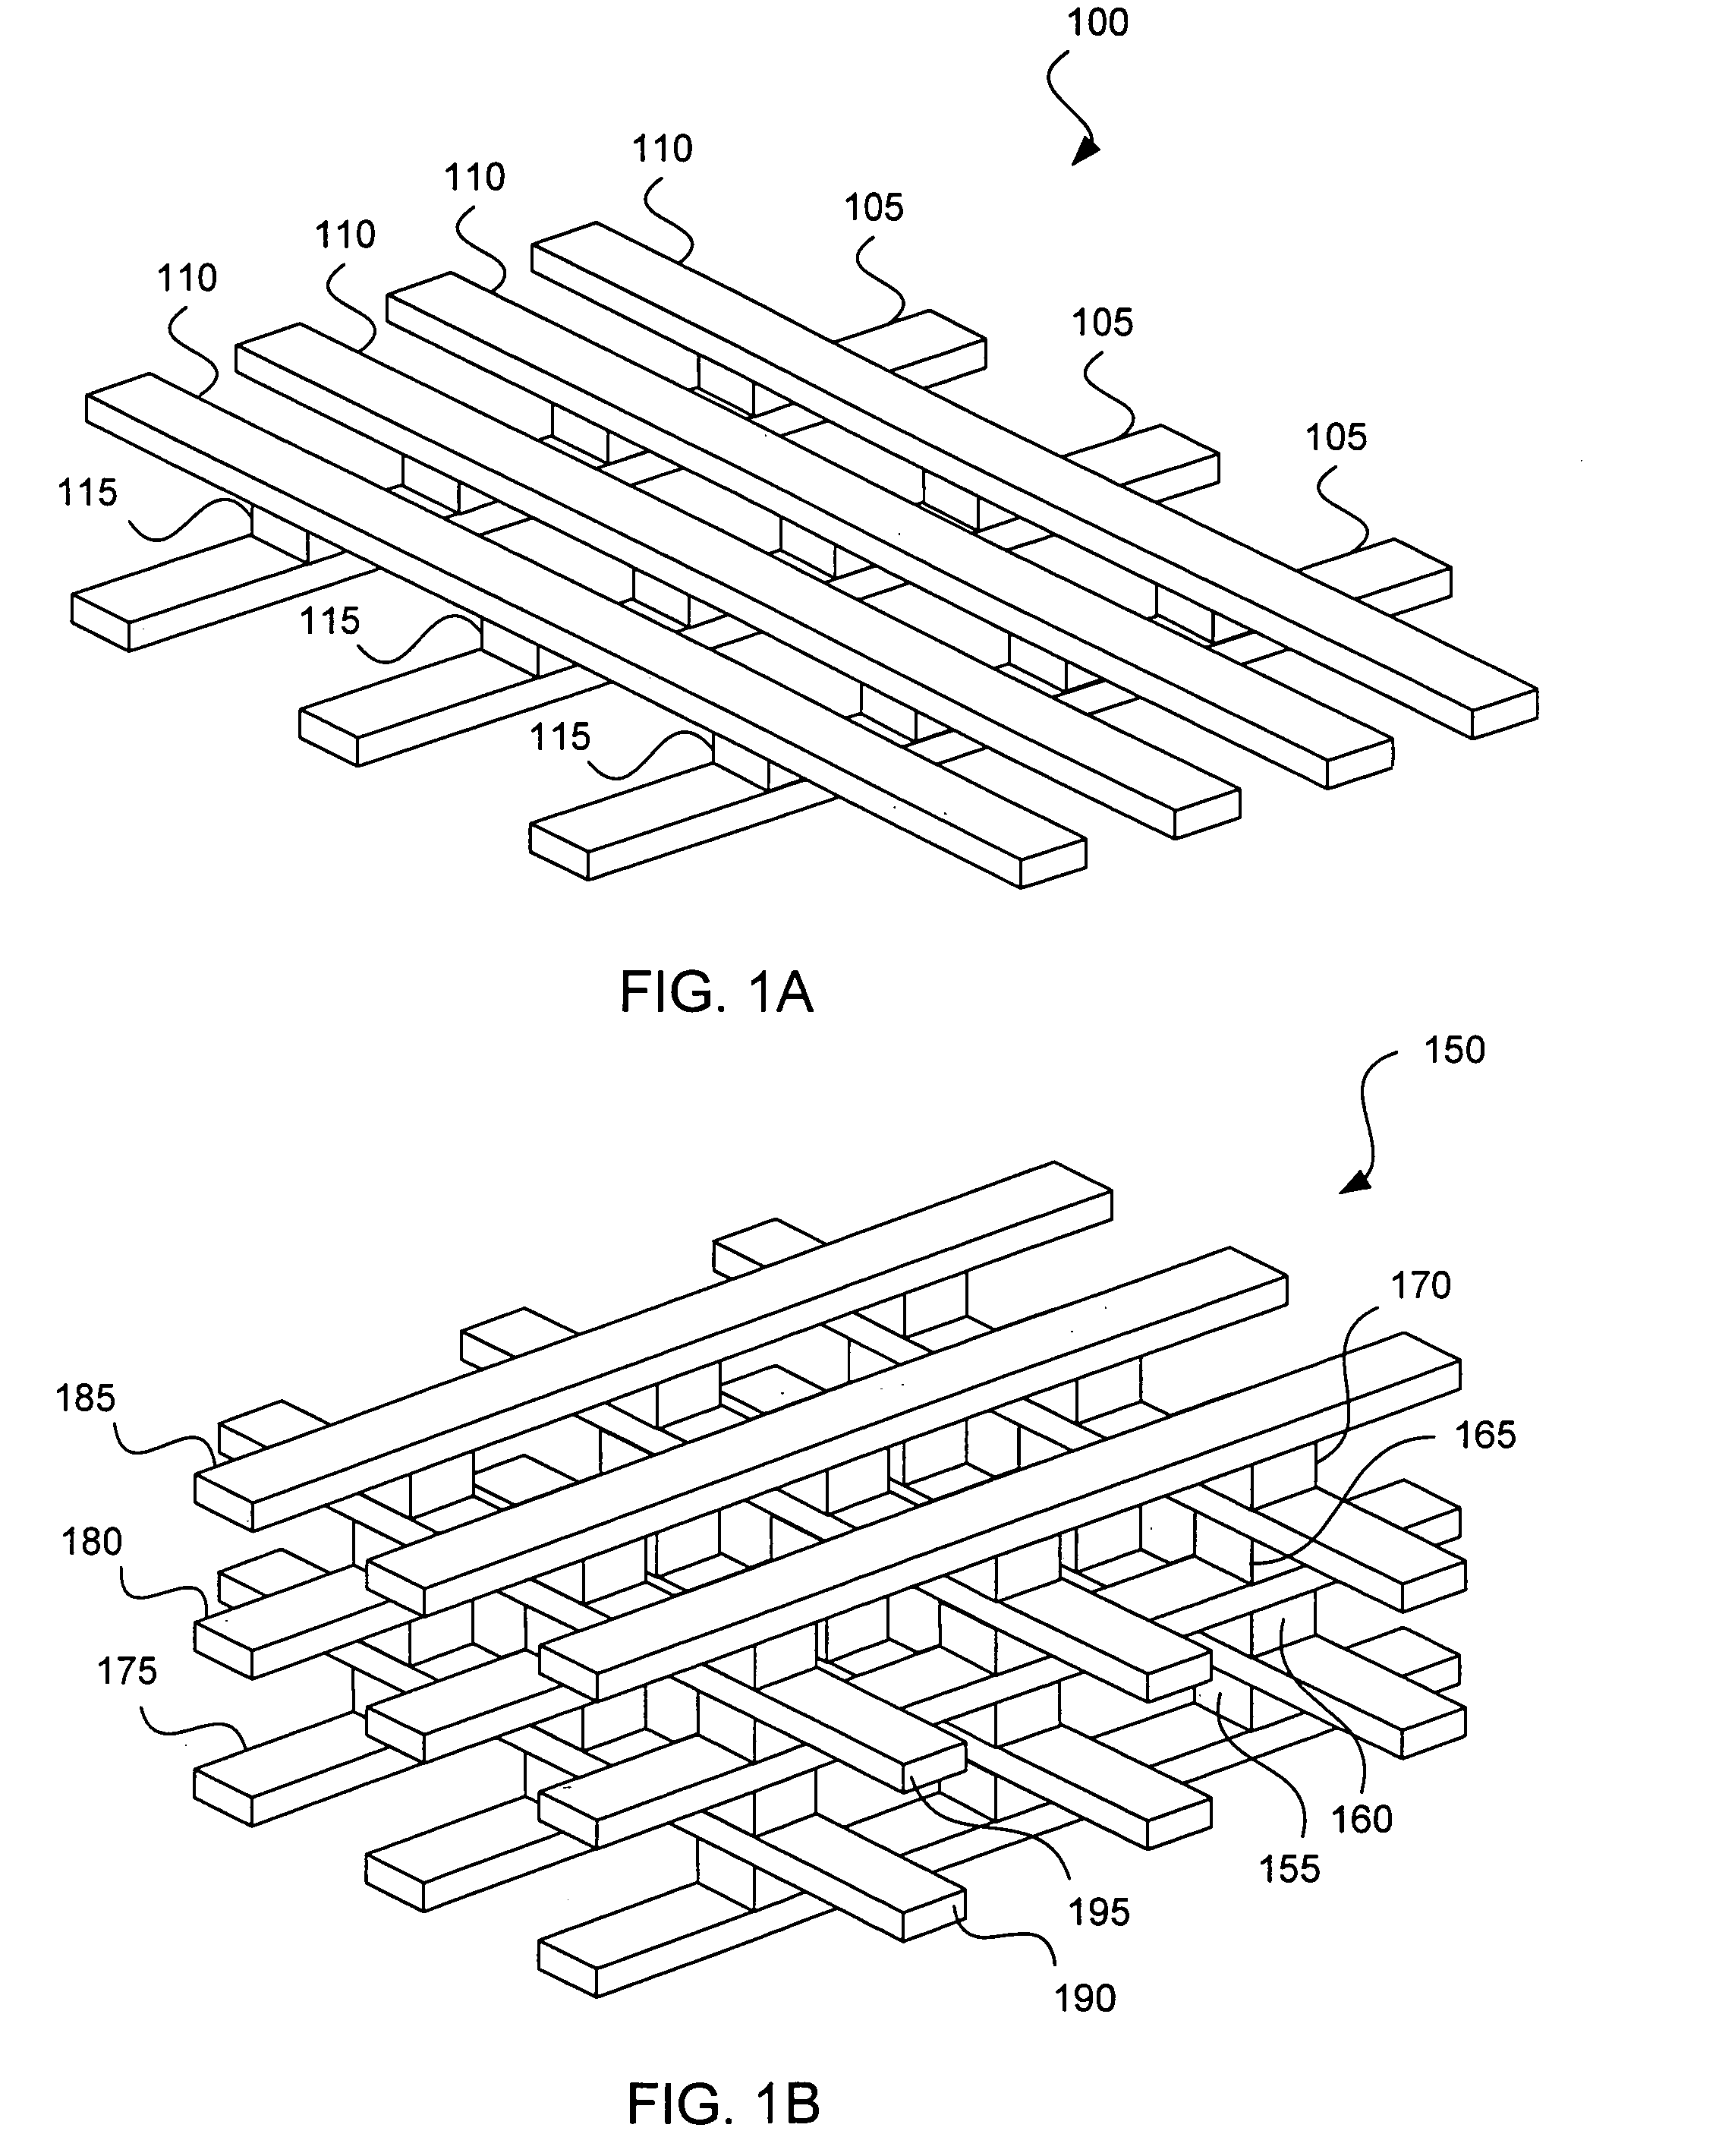 Two terminal memory array having reference cells